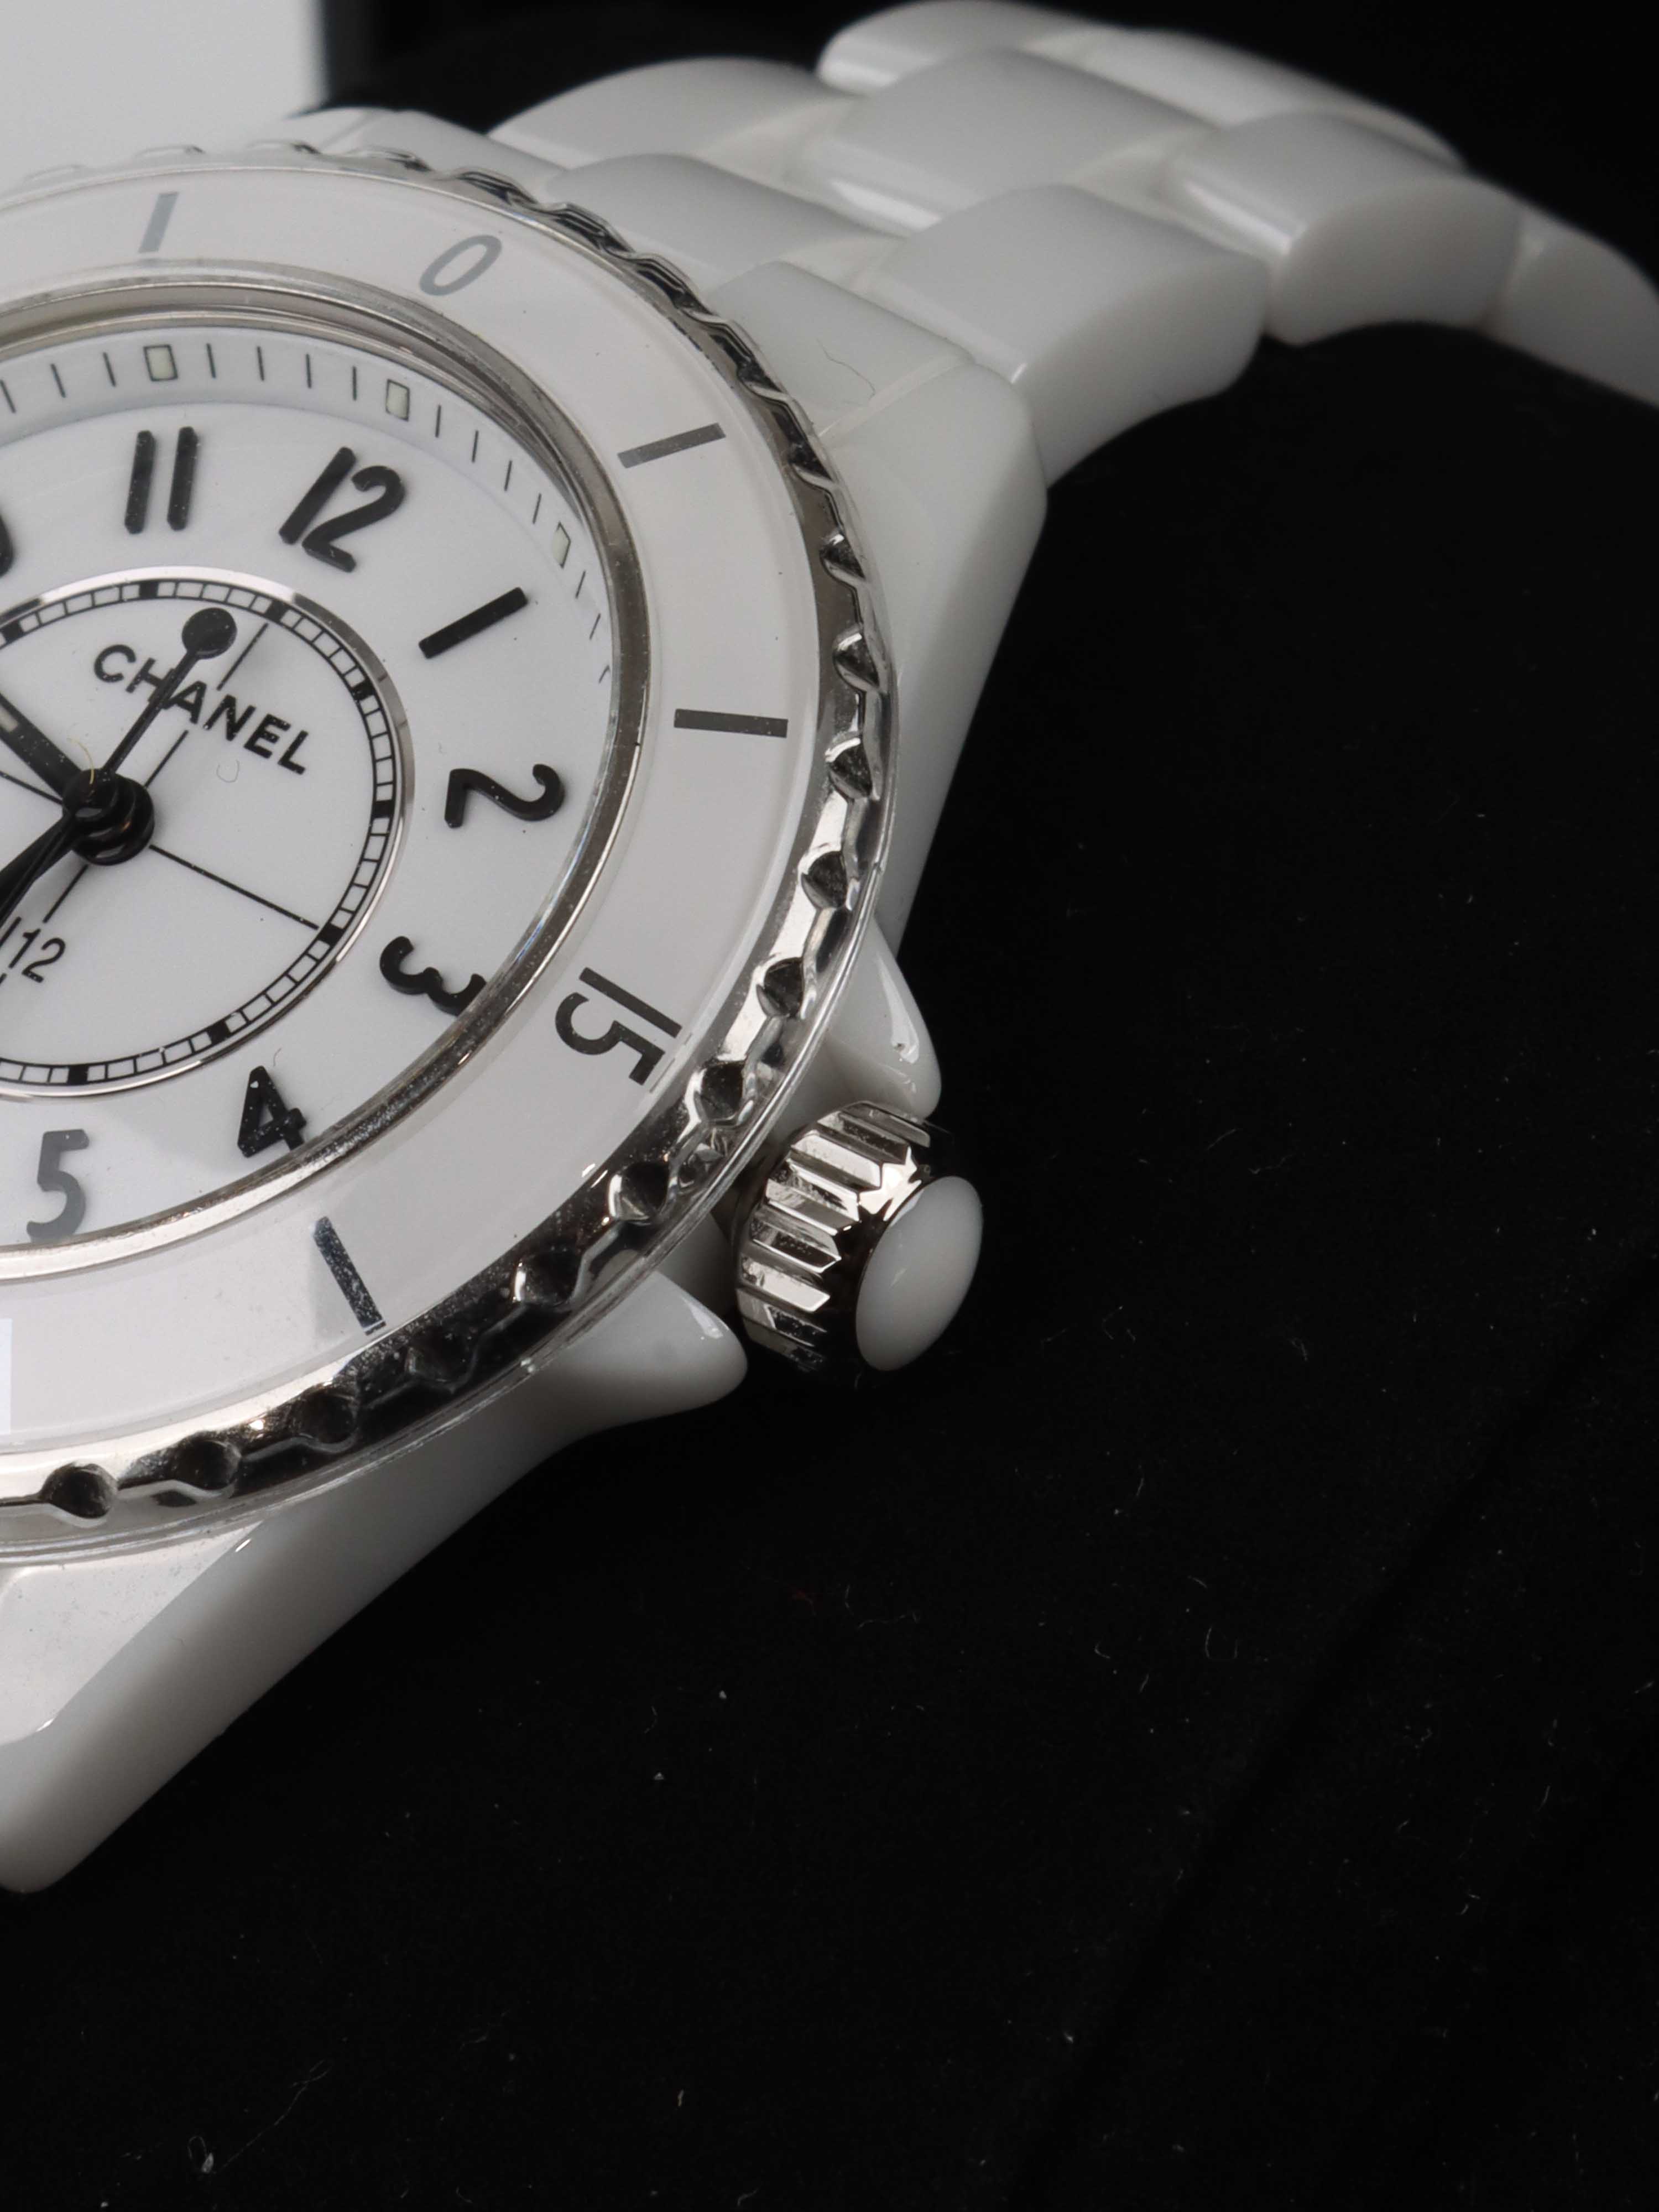 Chanel J12 Watch in White Ceramic and Steel 33mm.